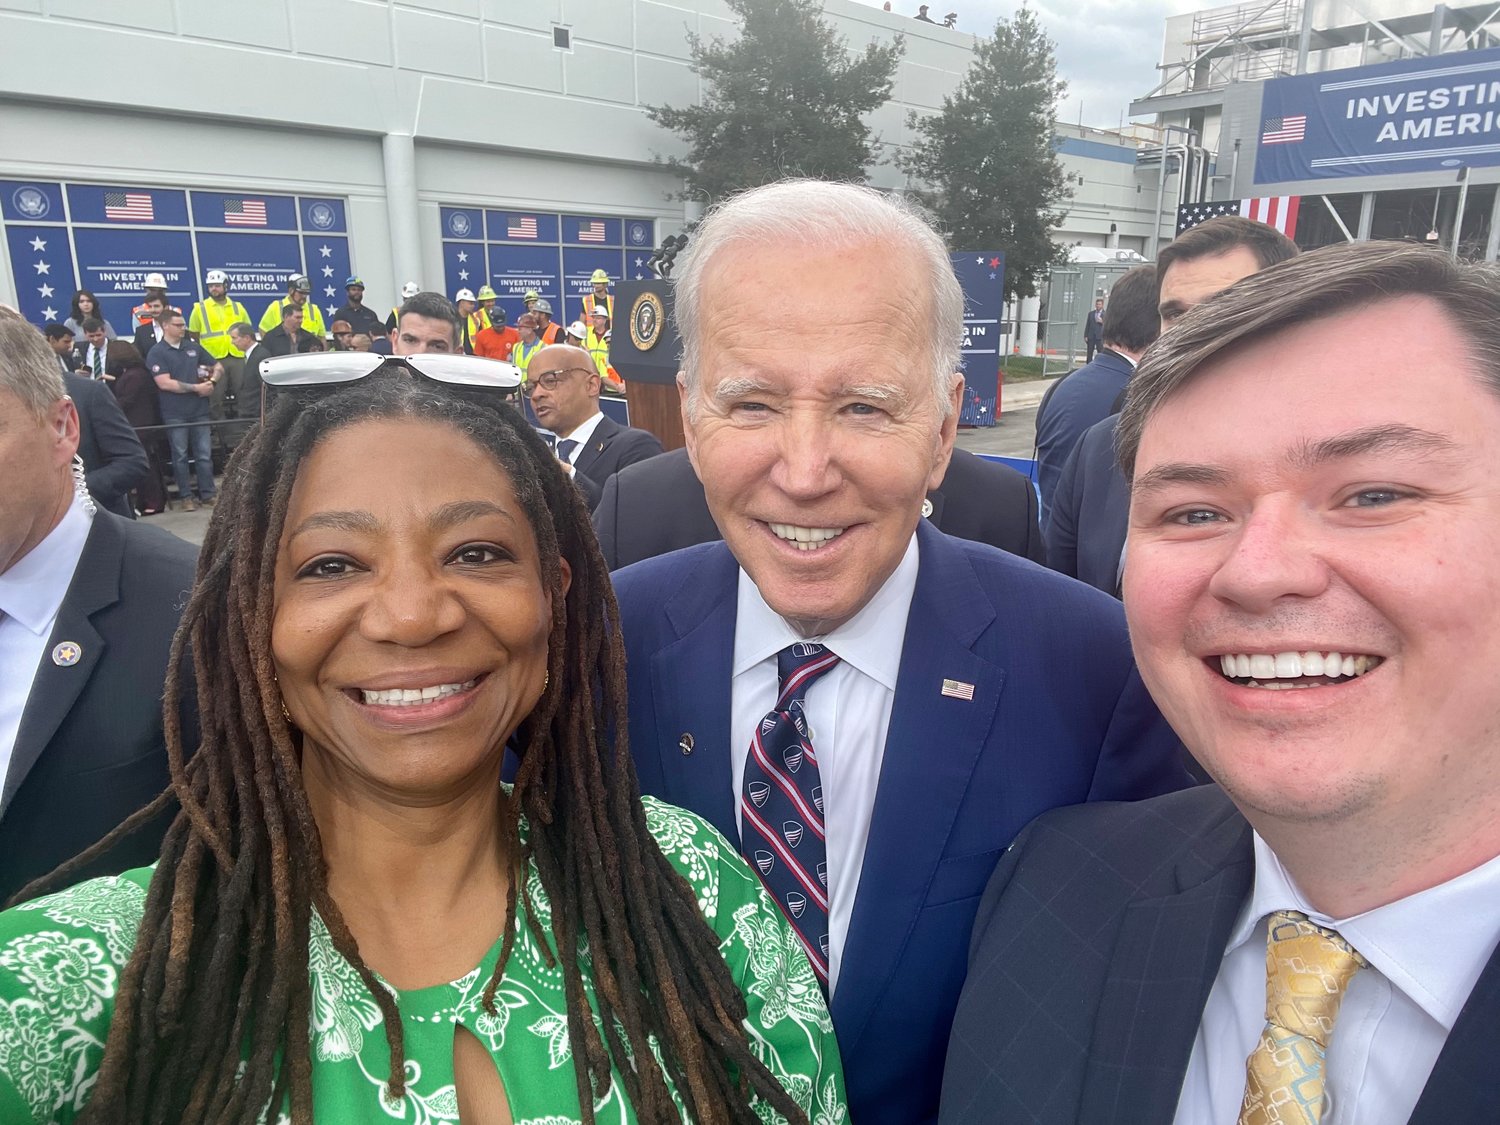 Siler City Manager Hank Raper (right) and Chatham County Commissioner Karen Howard pose for a selfie with U.S. President Joe Biden.